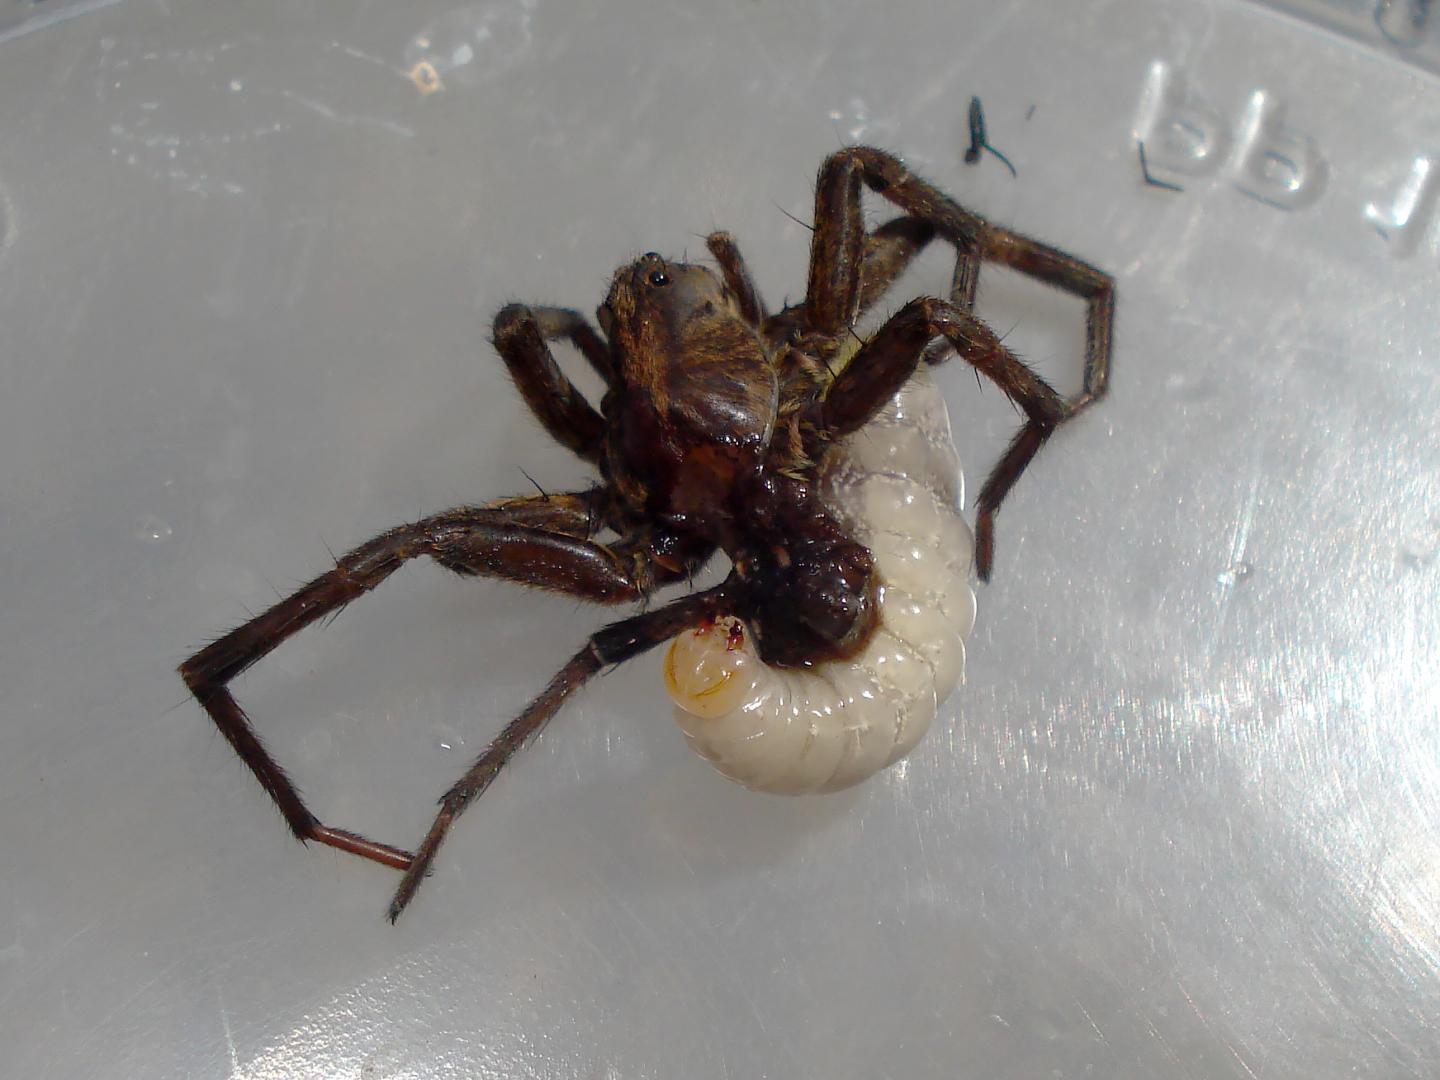 To Kill A Wolf Spider: Further Observation Of A Spider Wasp Larva Growing On Its Host (2/3)